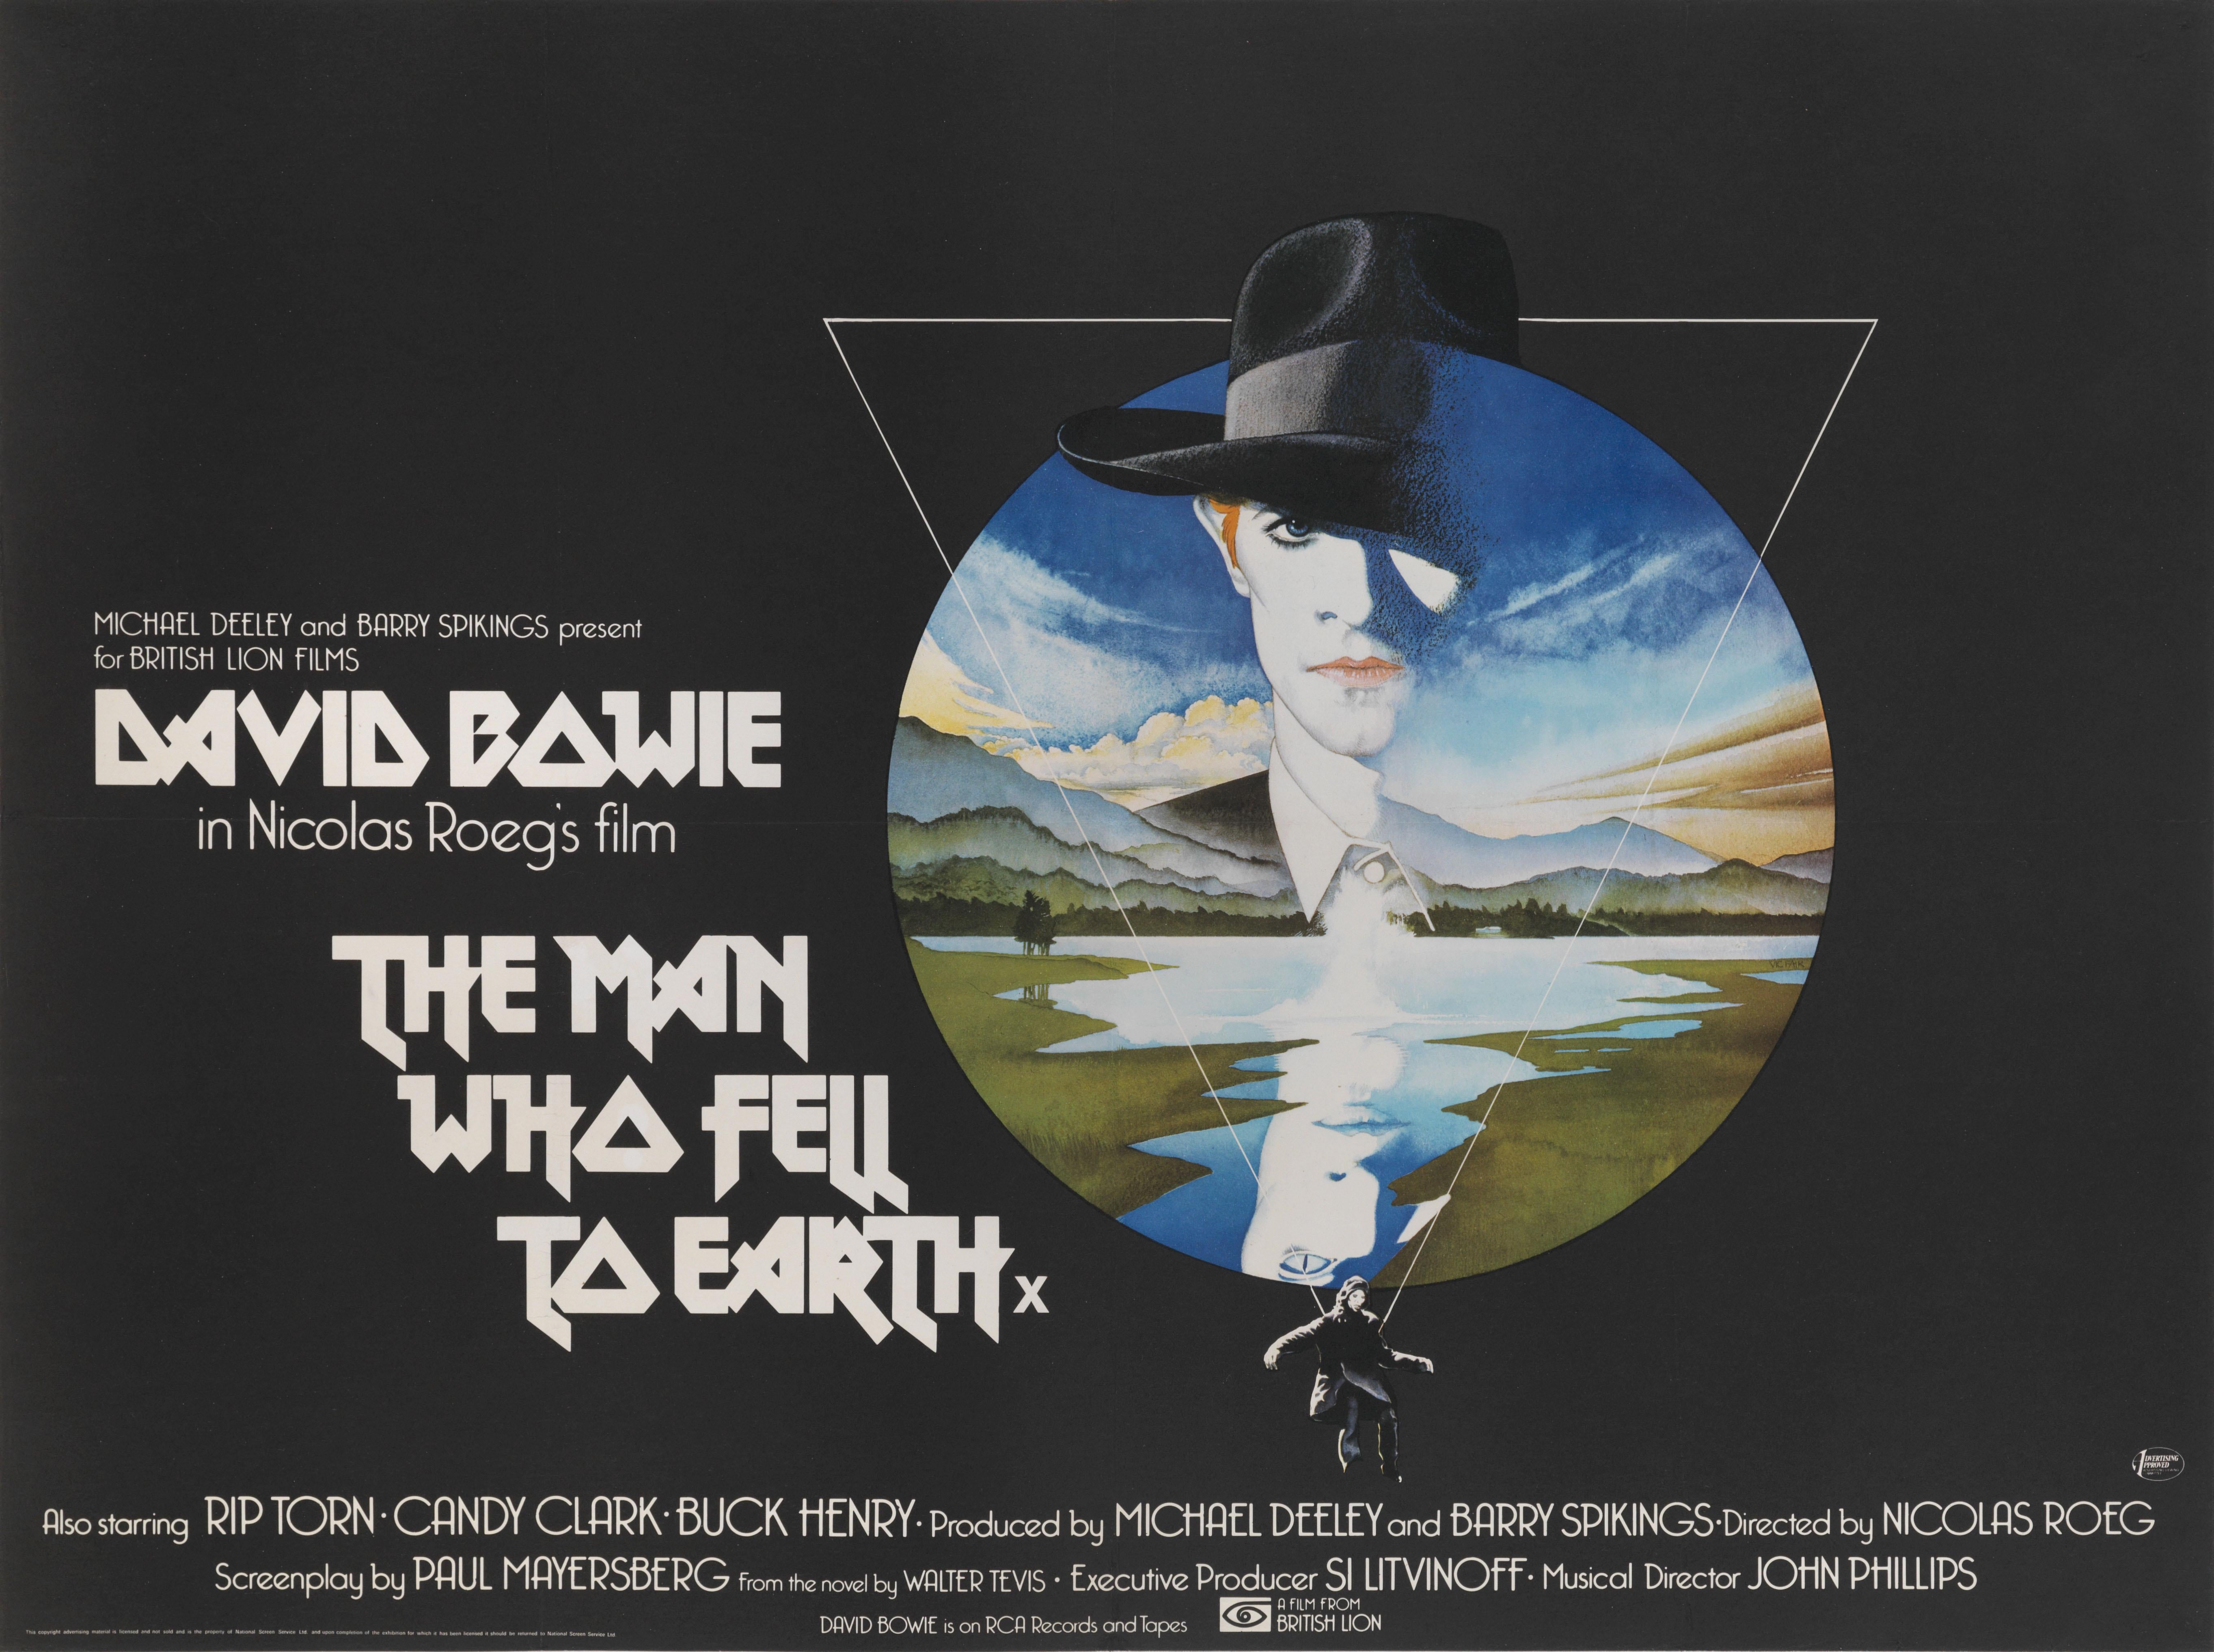 Original British film poster for Nicolas Roeg's 1976 science fiction film starring David Bowie. The artwork is by the legendary British poster designer Vic Fair (1938-2017)
This poster is conservation linen backed and it would be shipped by Federal